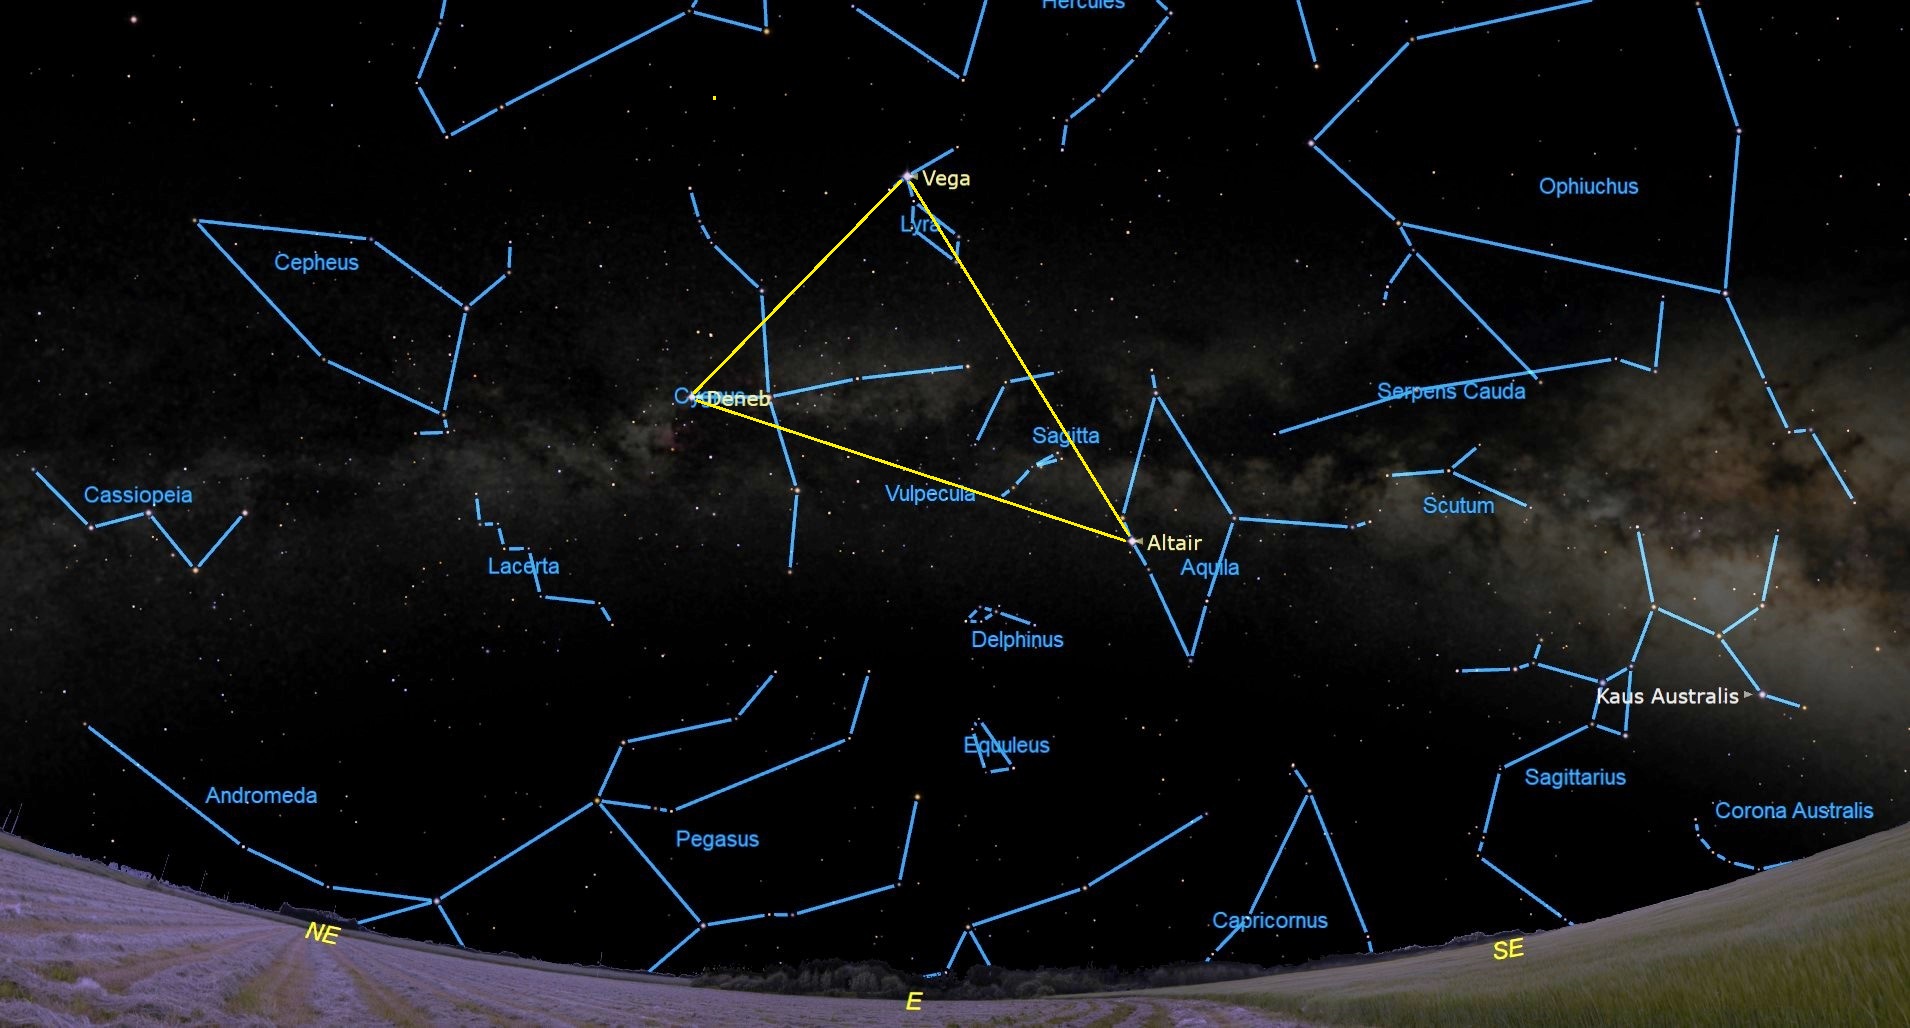 July 22, 2023 at 9:30 pm - The Summer Triangle, Vega, Altair and Deneb, originate a triangle within the starry night sky, surrounded by outlined constellations